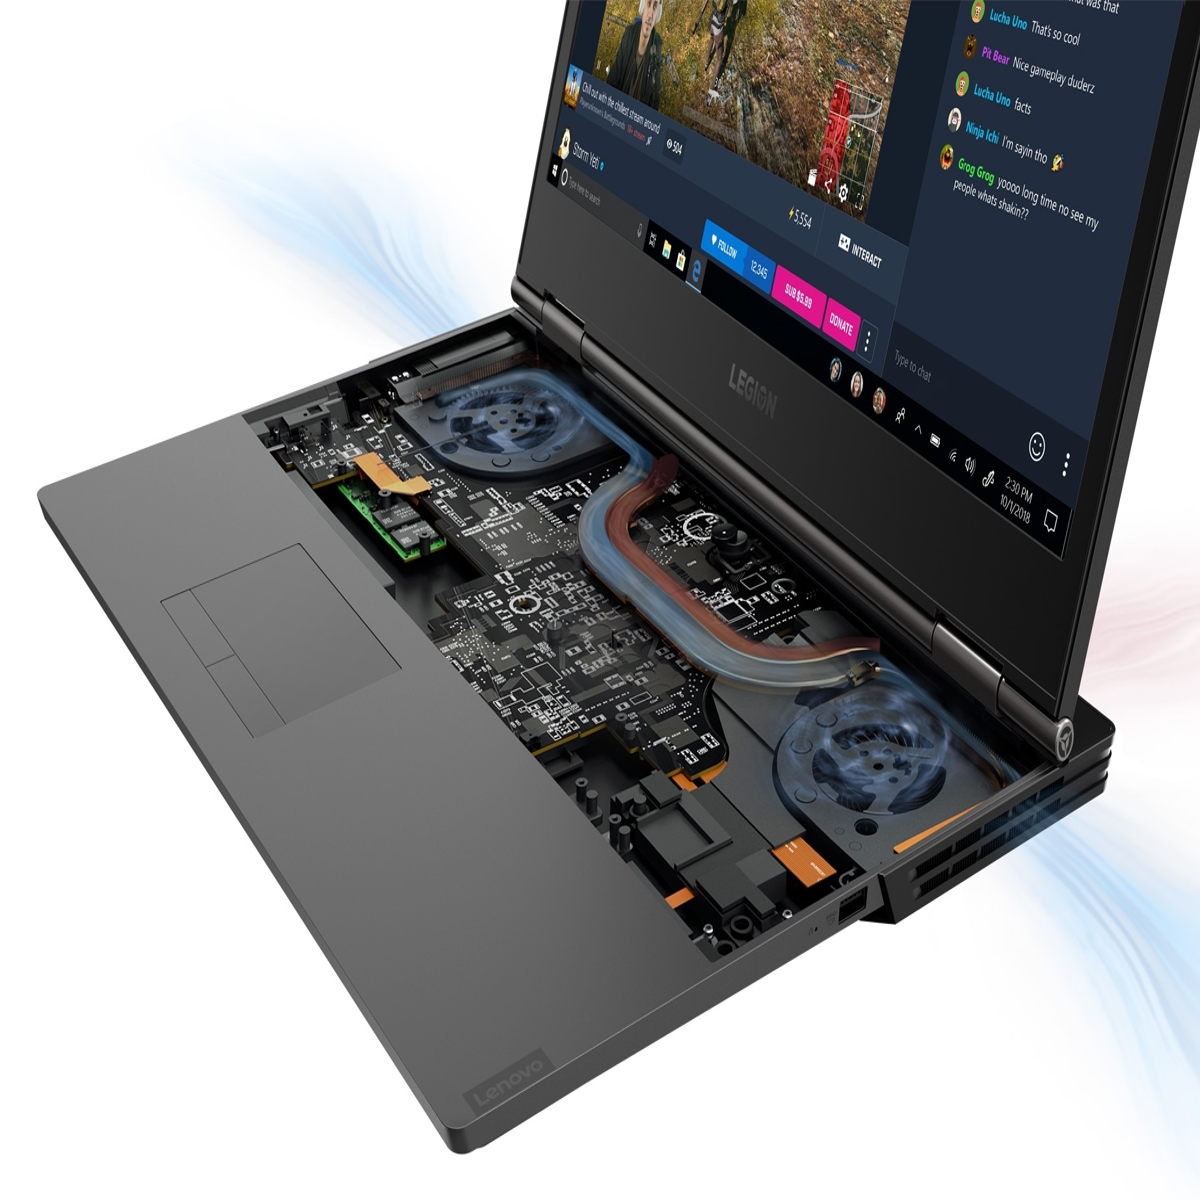 Best gaming laptops revealed at CES 2019: RTX graphics, 8th-gen